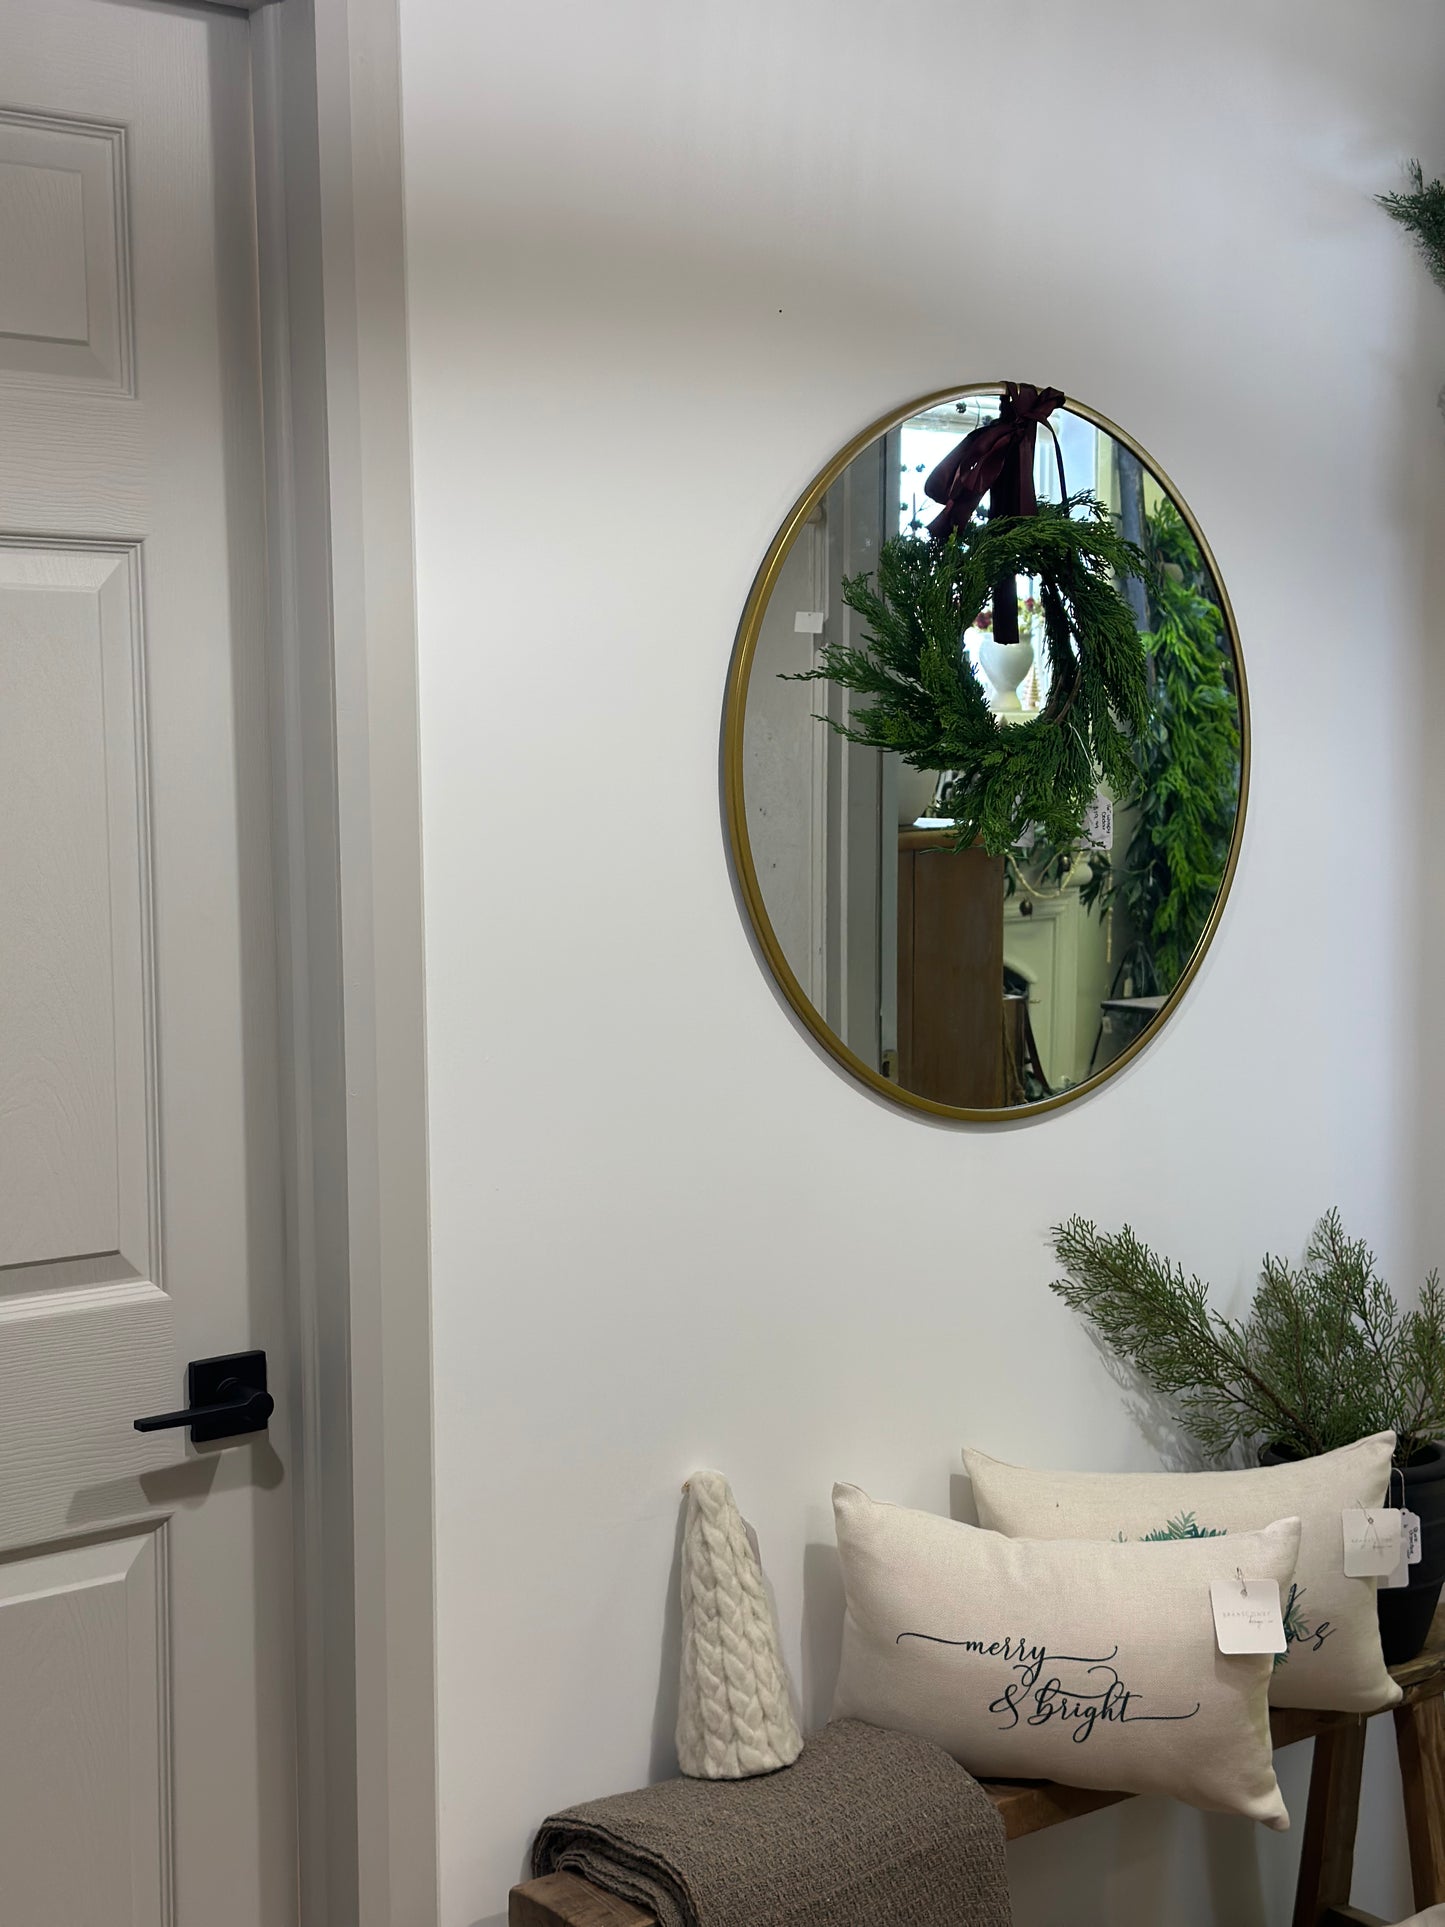 28” Gold trimmed circle mirror